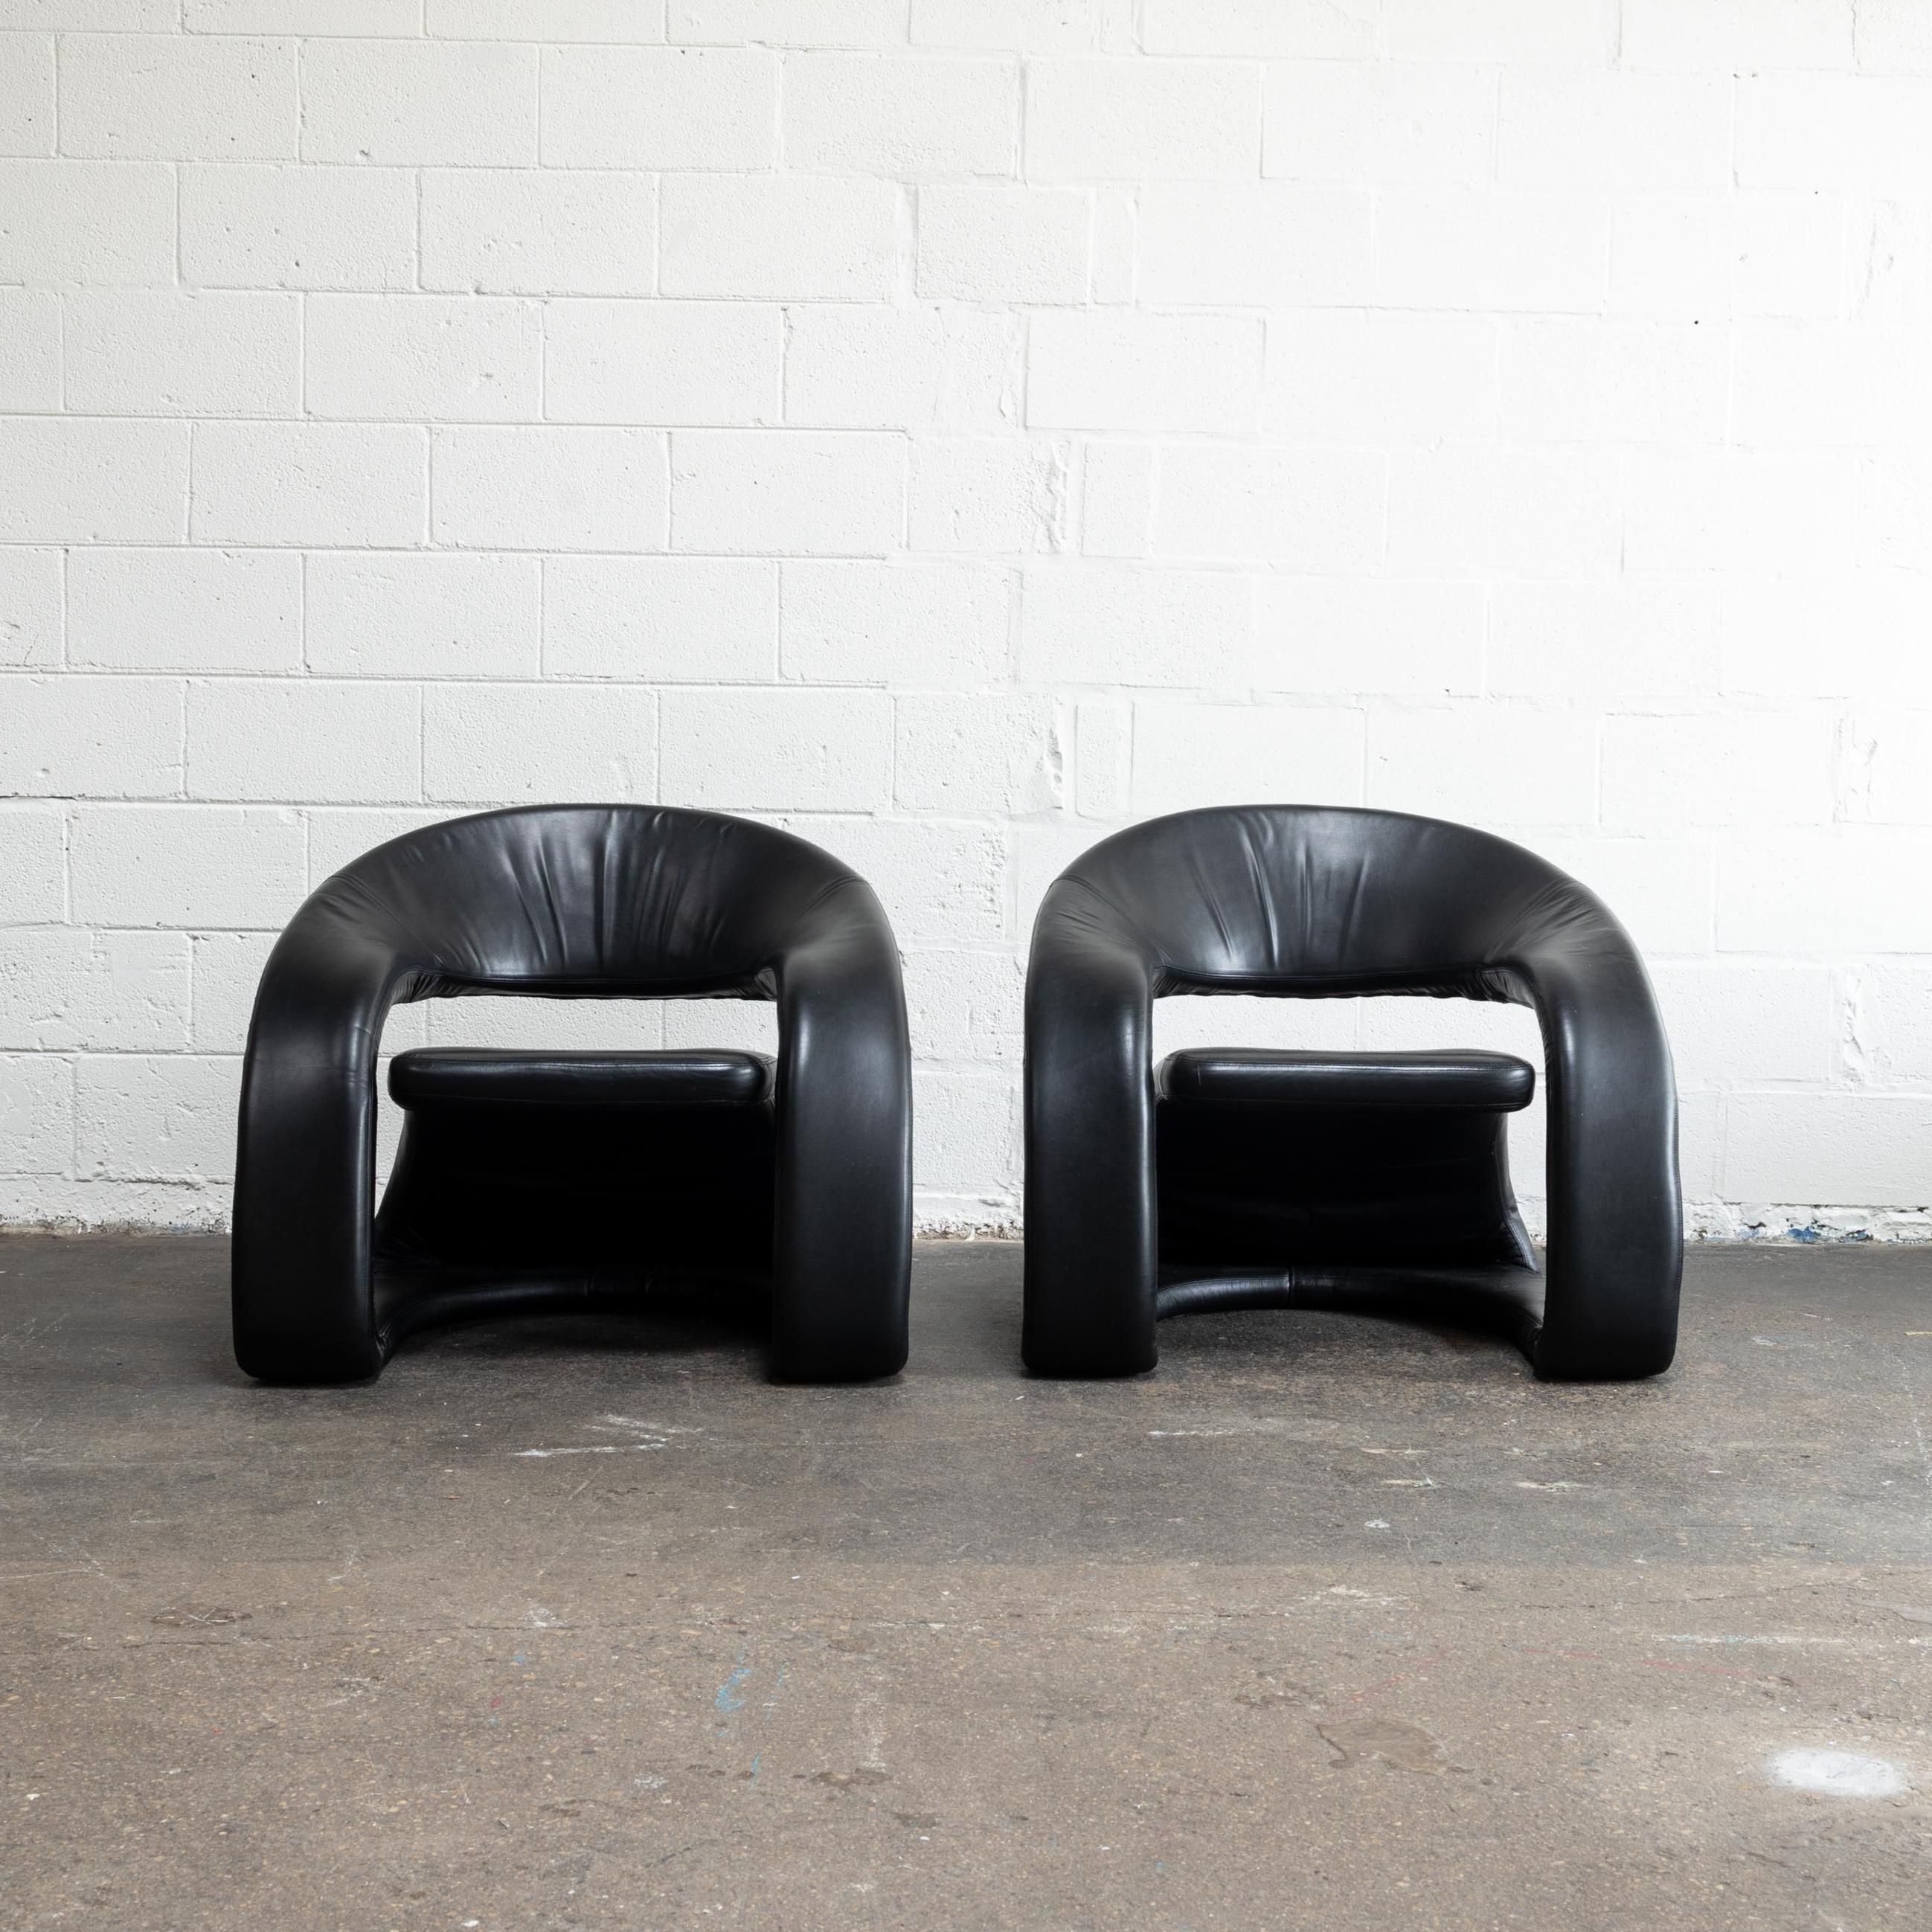 w/ black leather upholstery c. 1980s in great vintage condition ft. a cantilevered seat - they're incredibly comfortable.